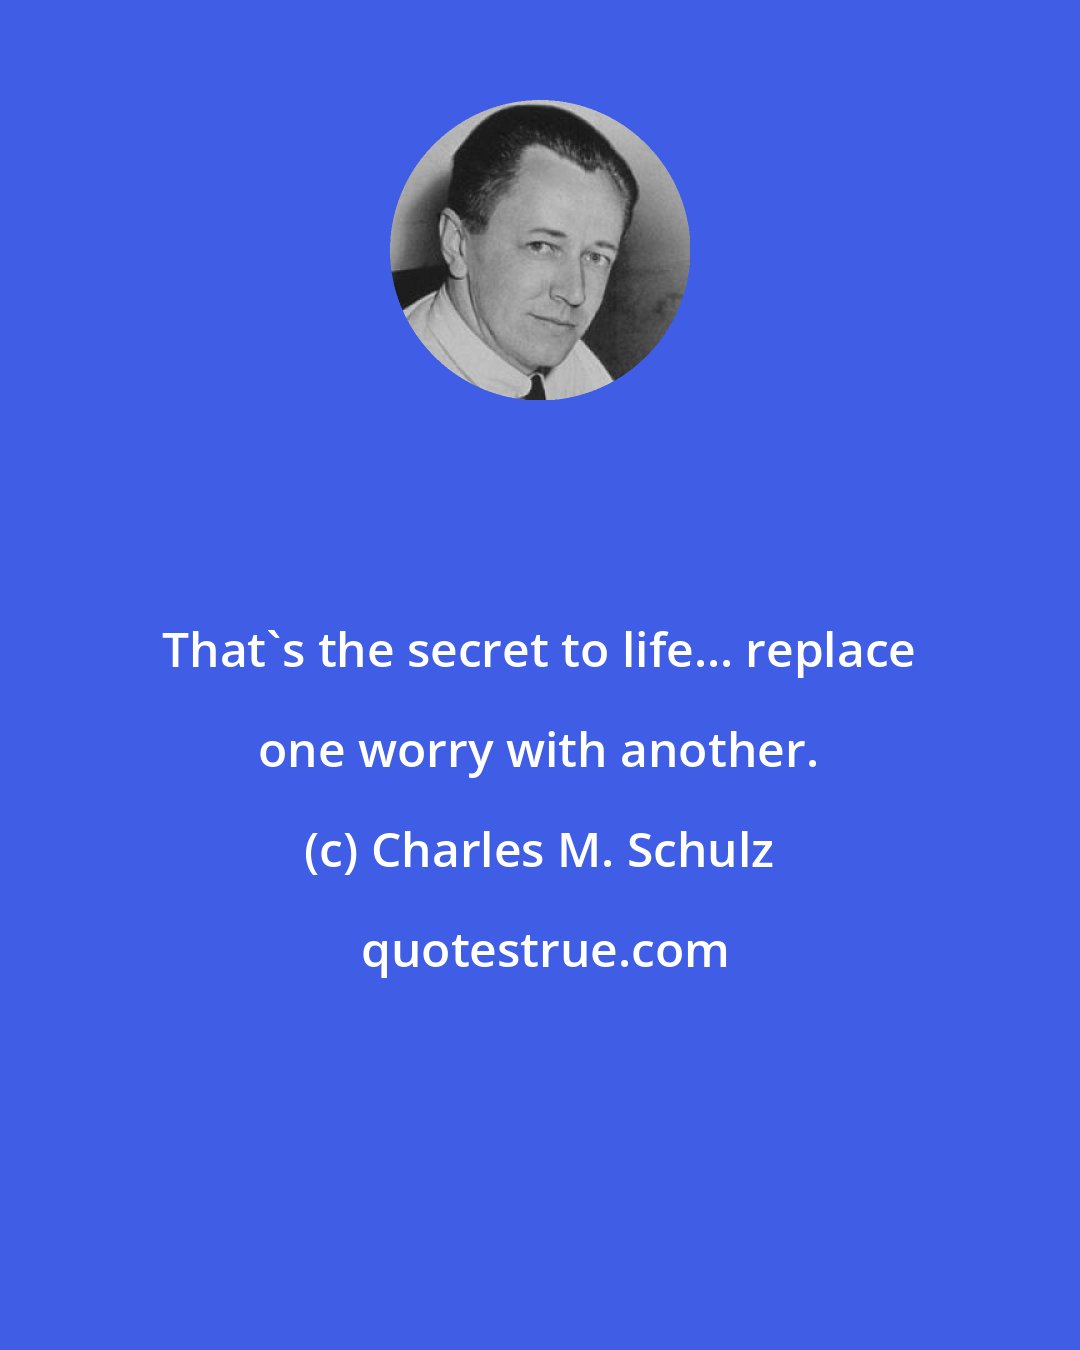 Charles M. Schulz: That's the secret to life... replace one worry with another.